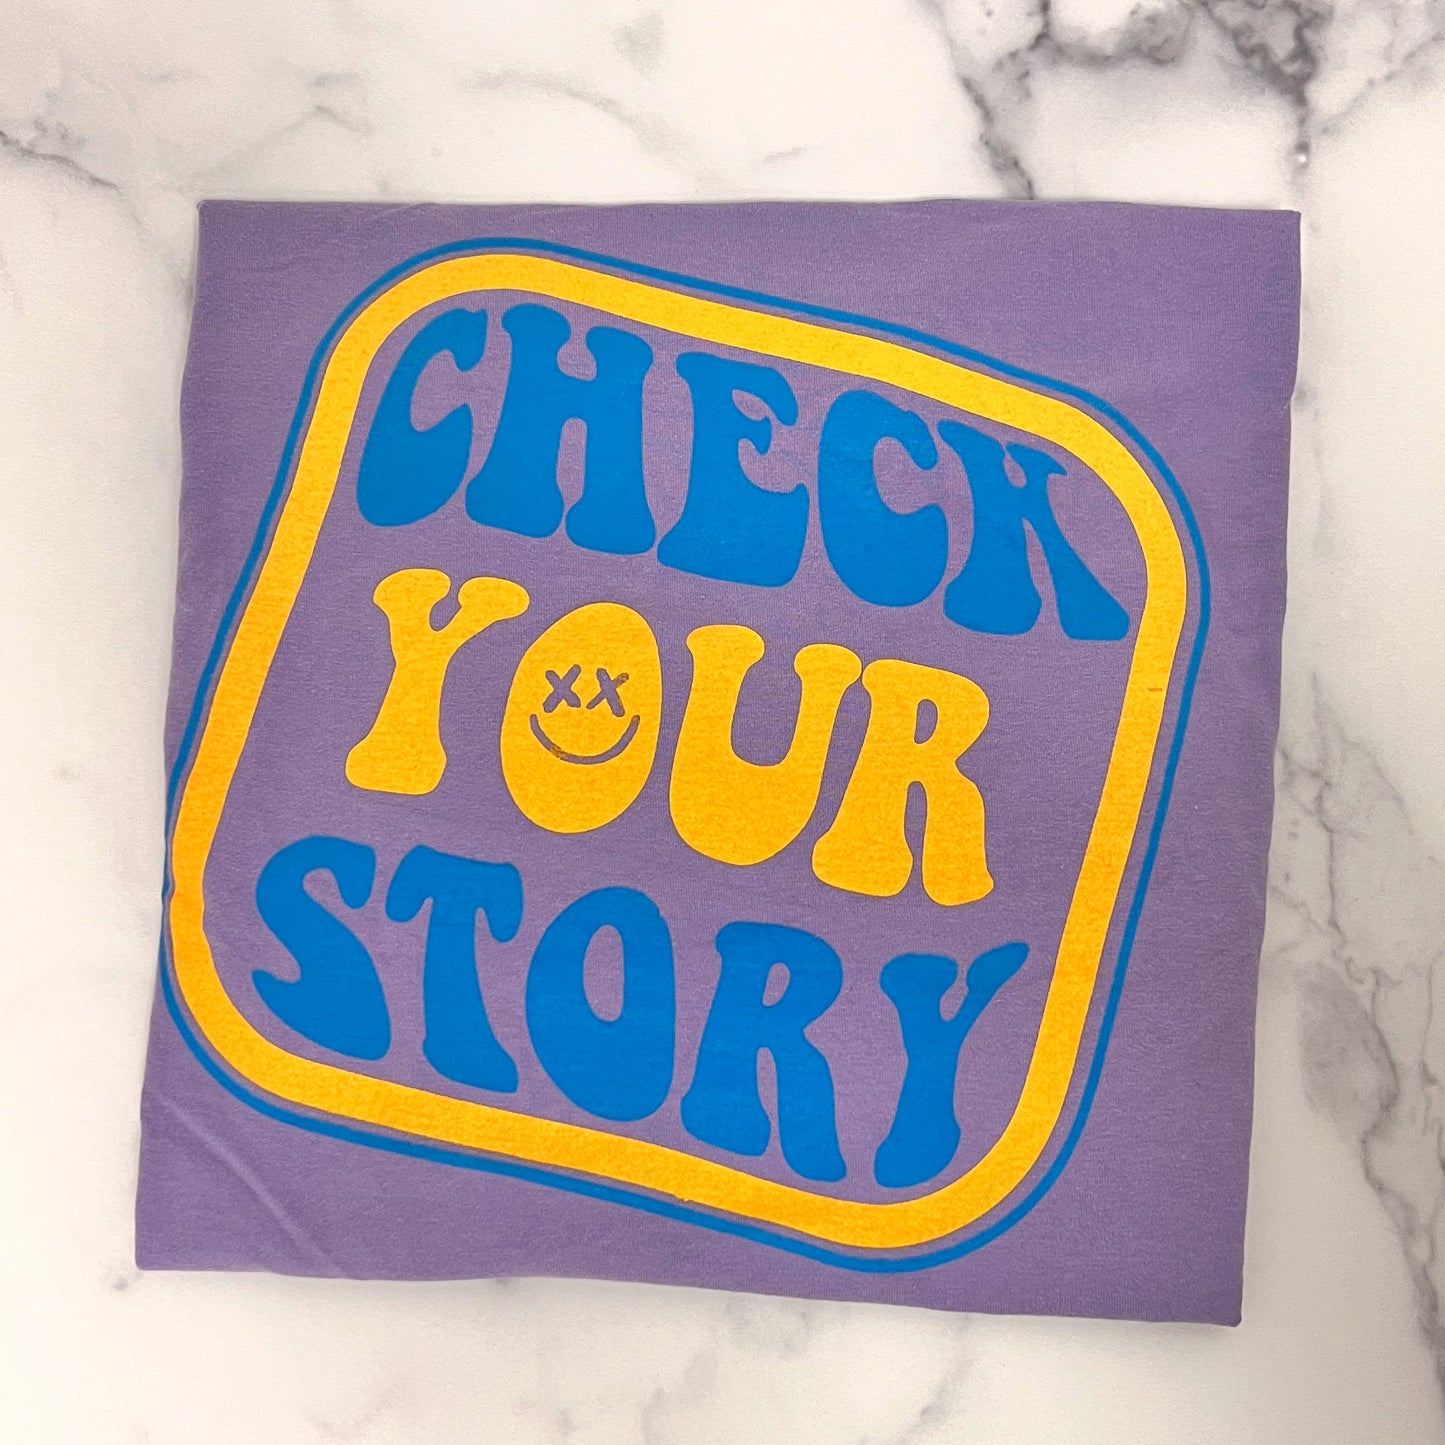 Check Your Story Tee